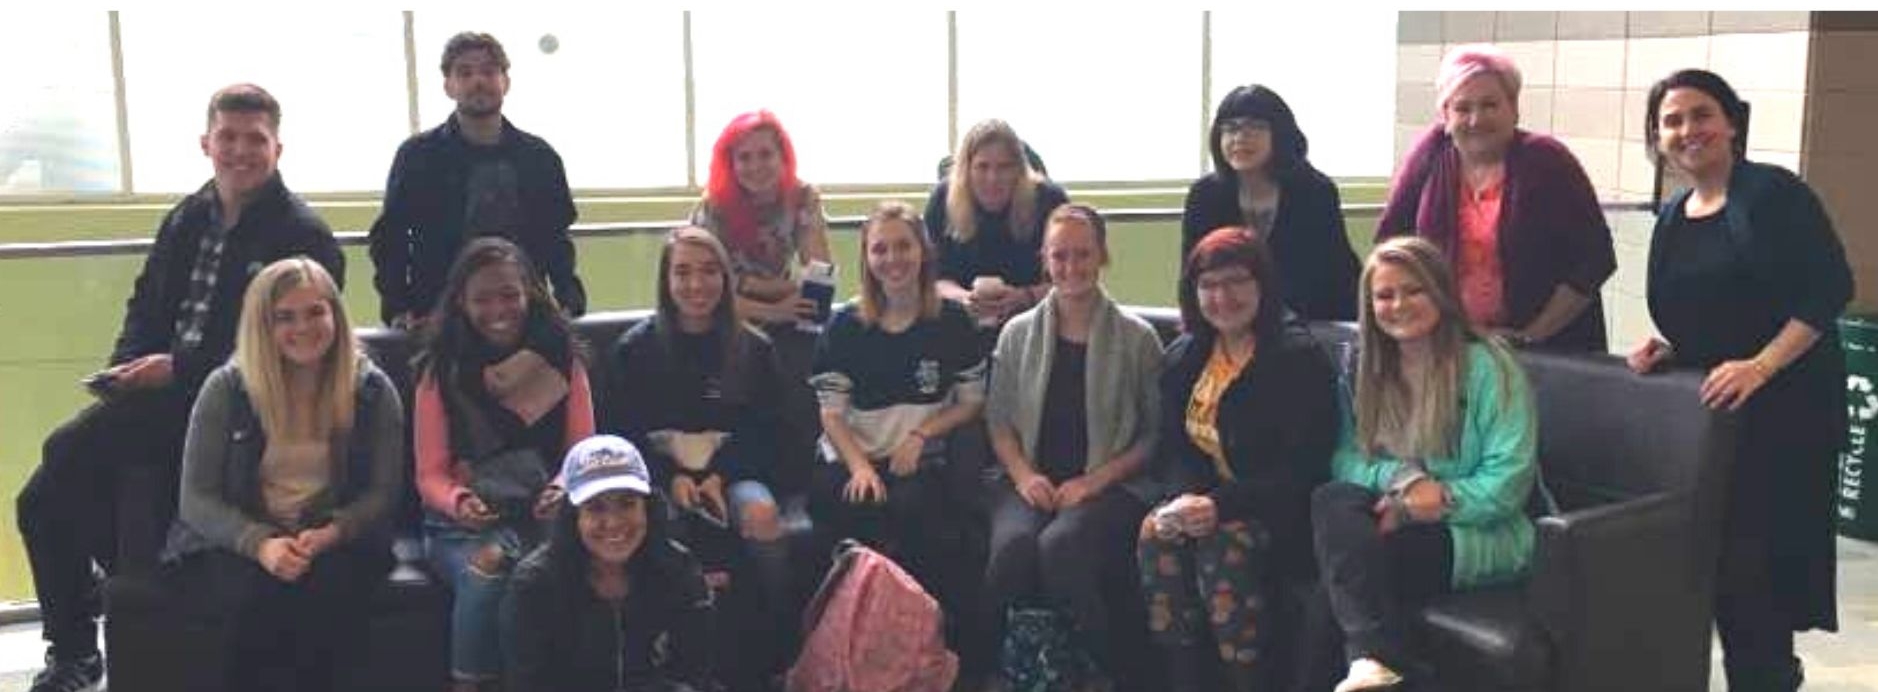 Image of students waiting in an airport to leave for Ireland